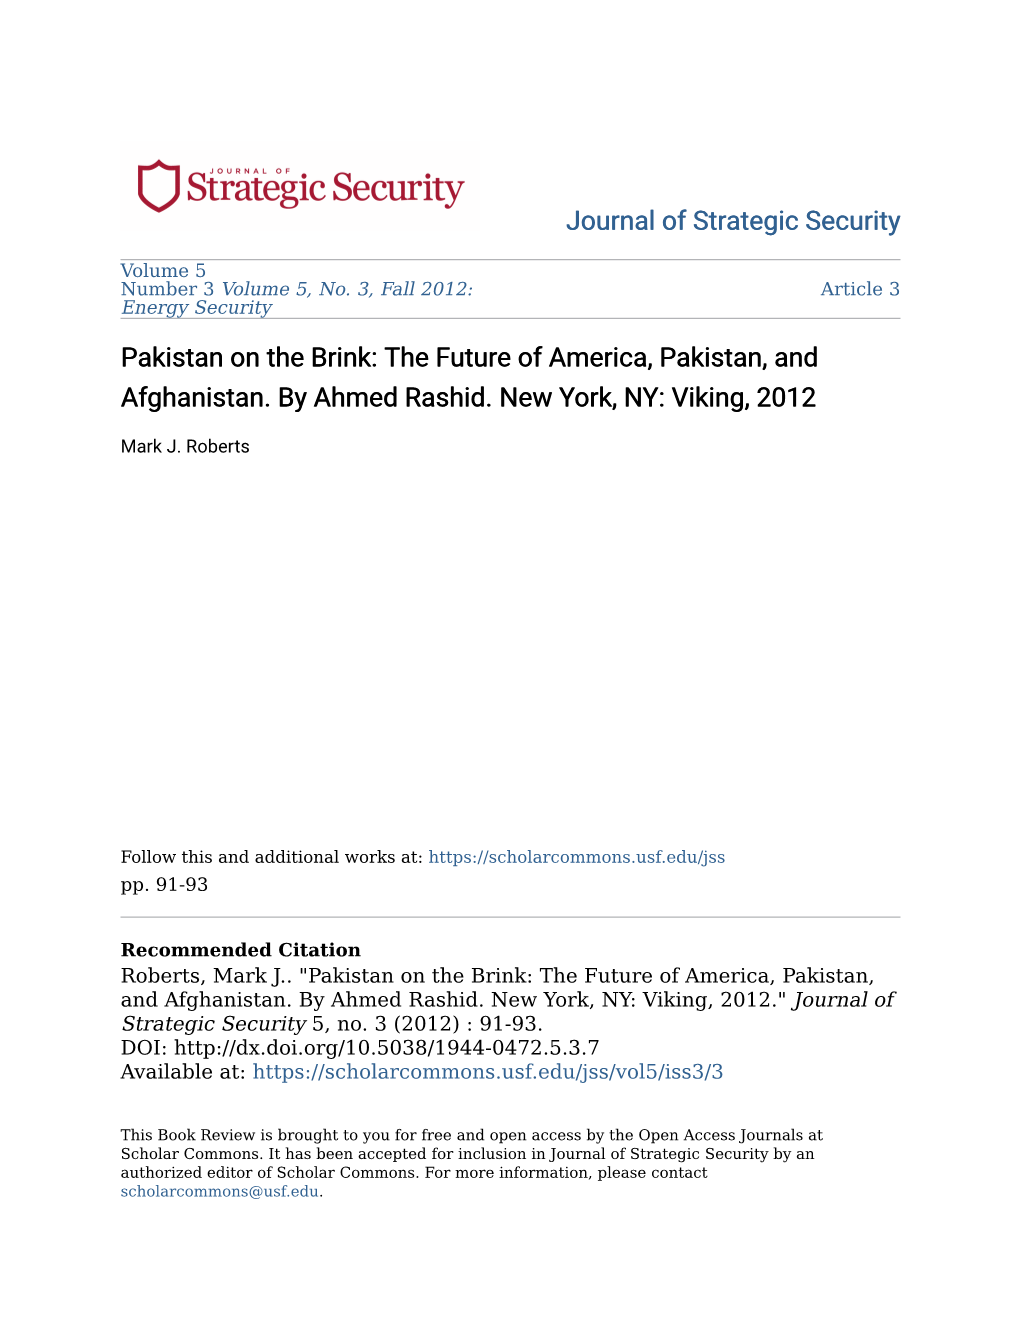 Pakistan on the Brink: the Future of America, Pakistan, and Afghanistan